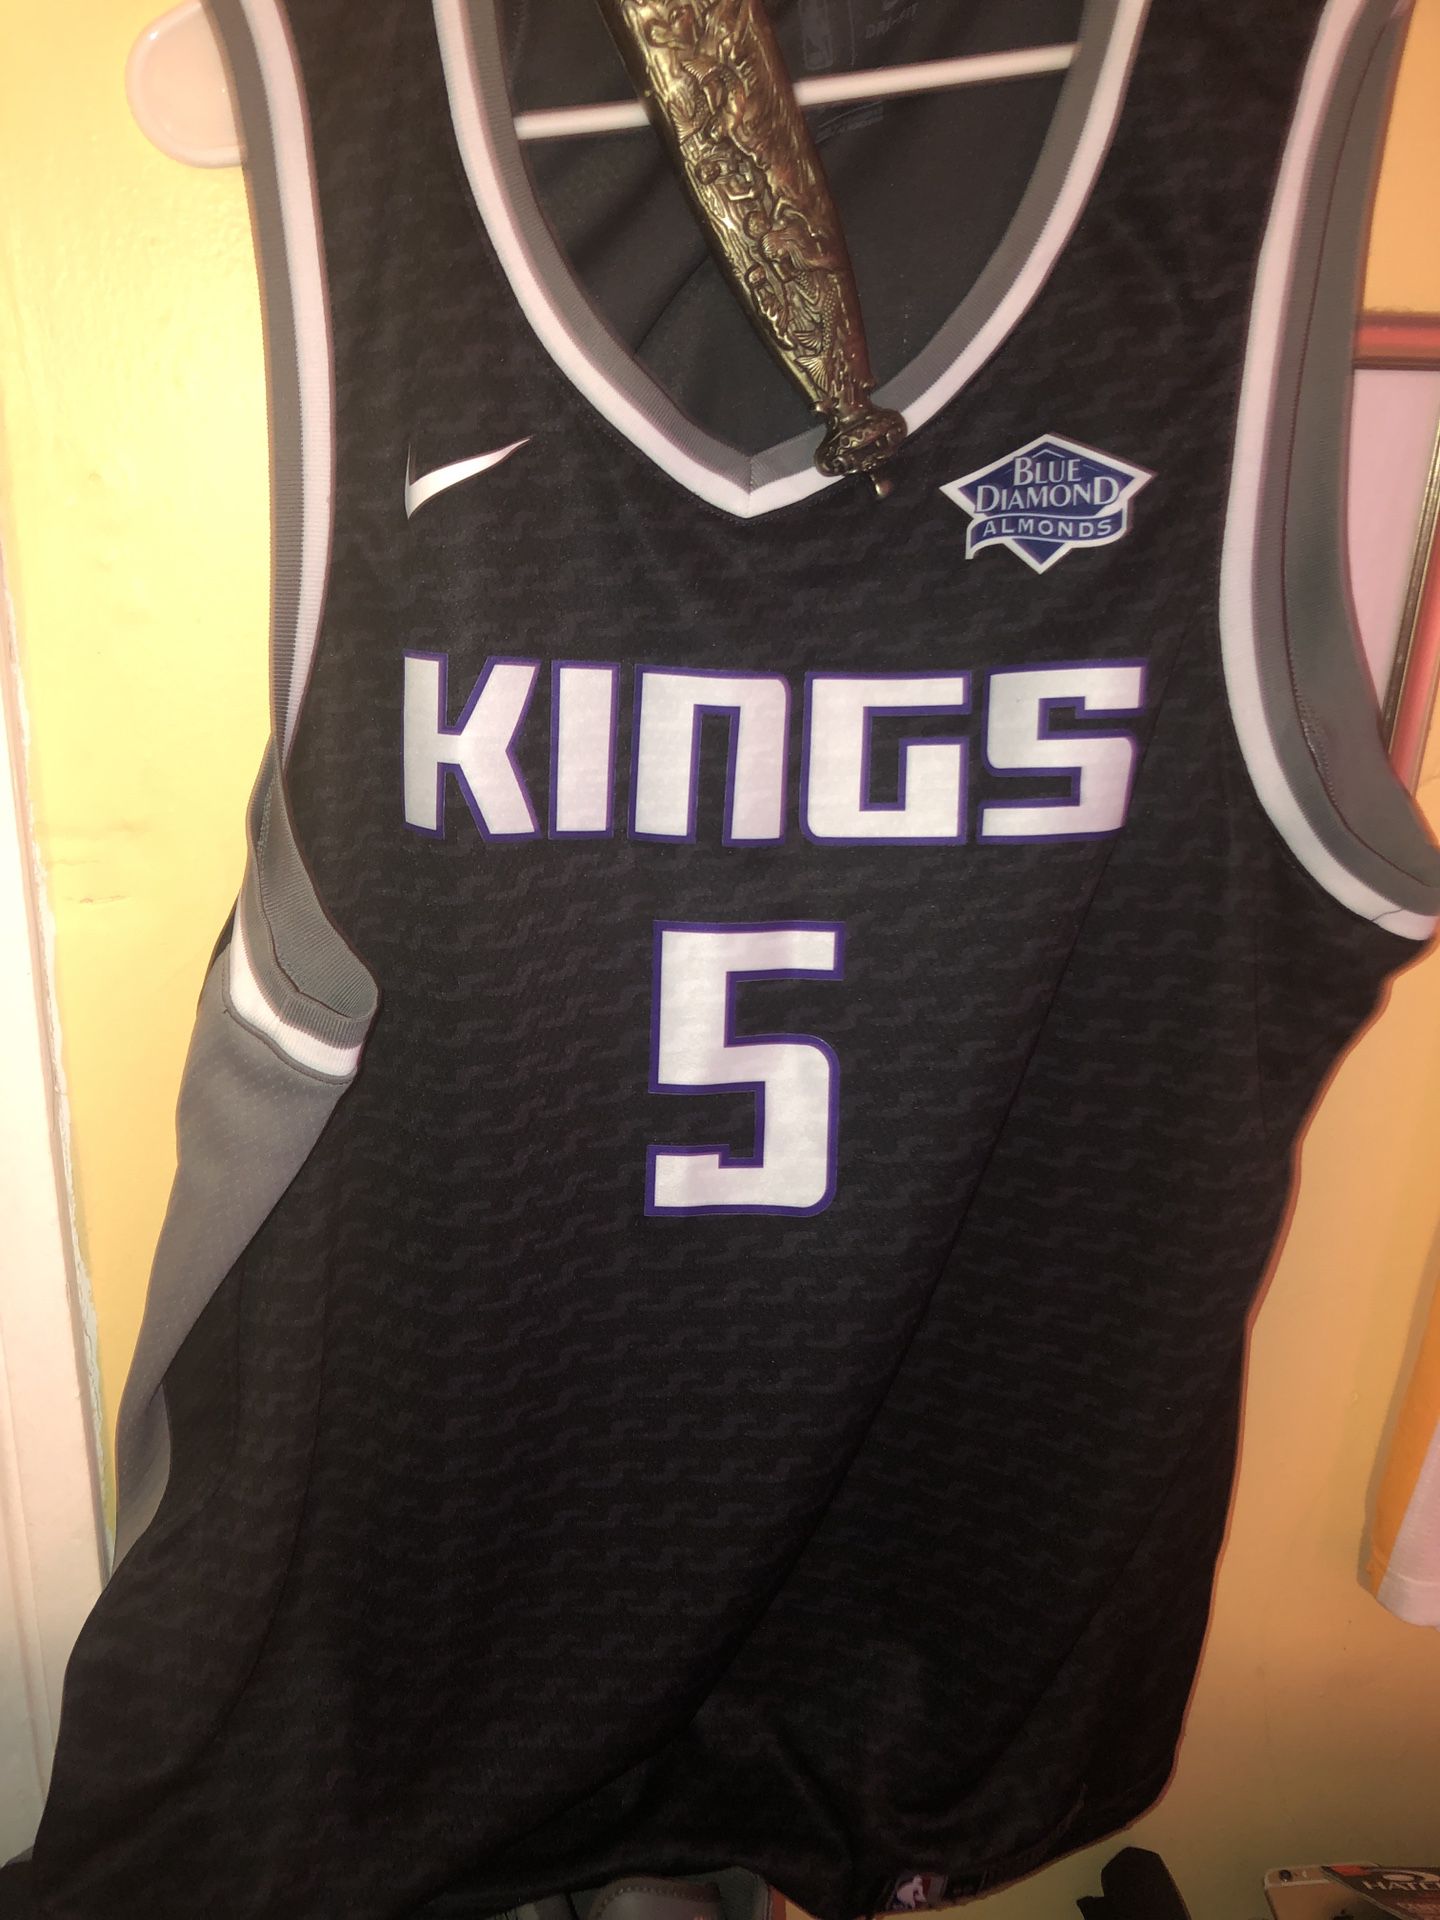 Sacromento Kings jersey and Backstage pass and unused ticket